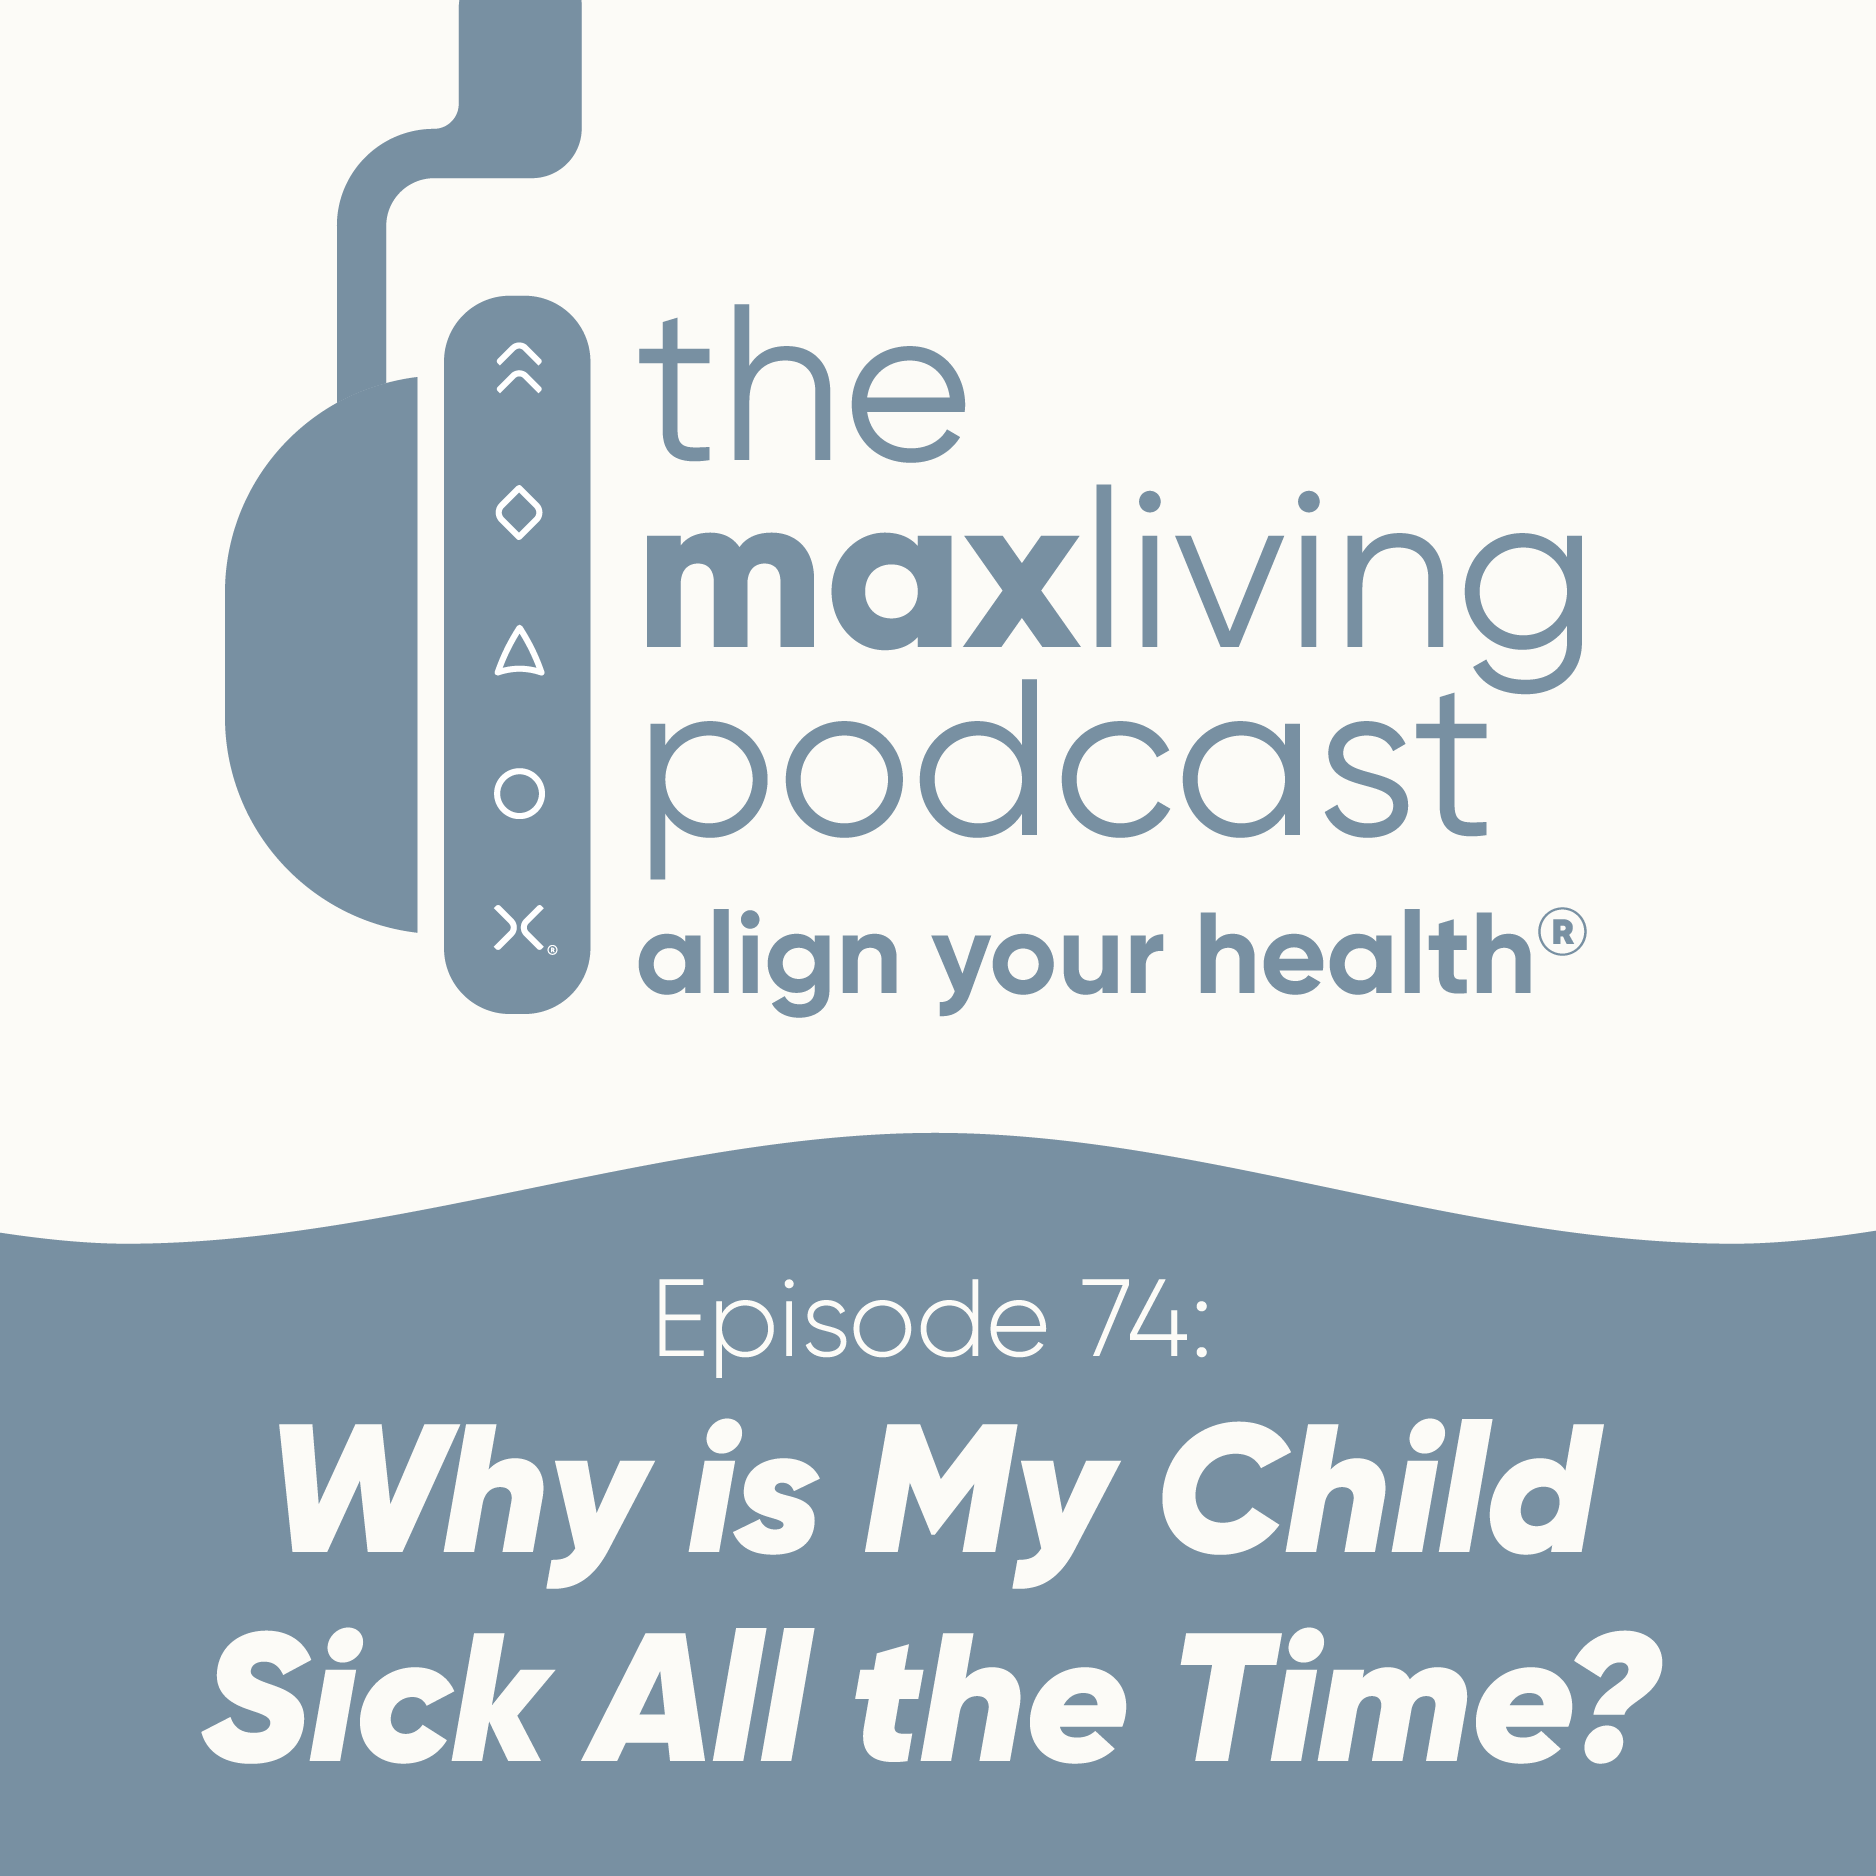 Why is My Child Sick All the Time?